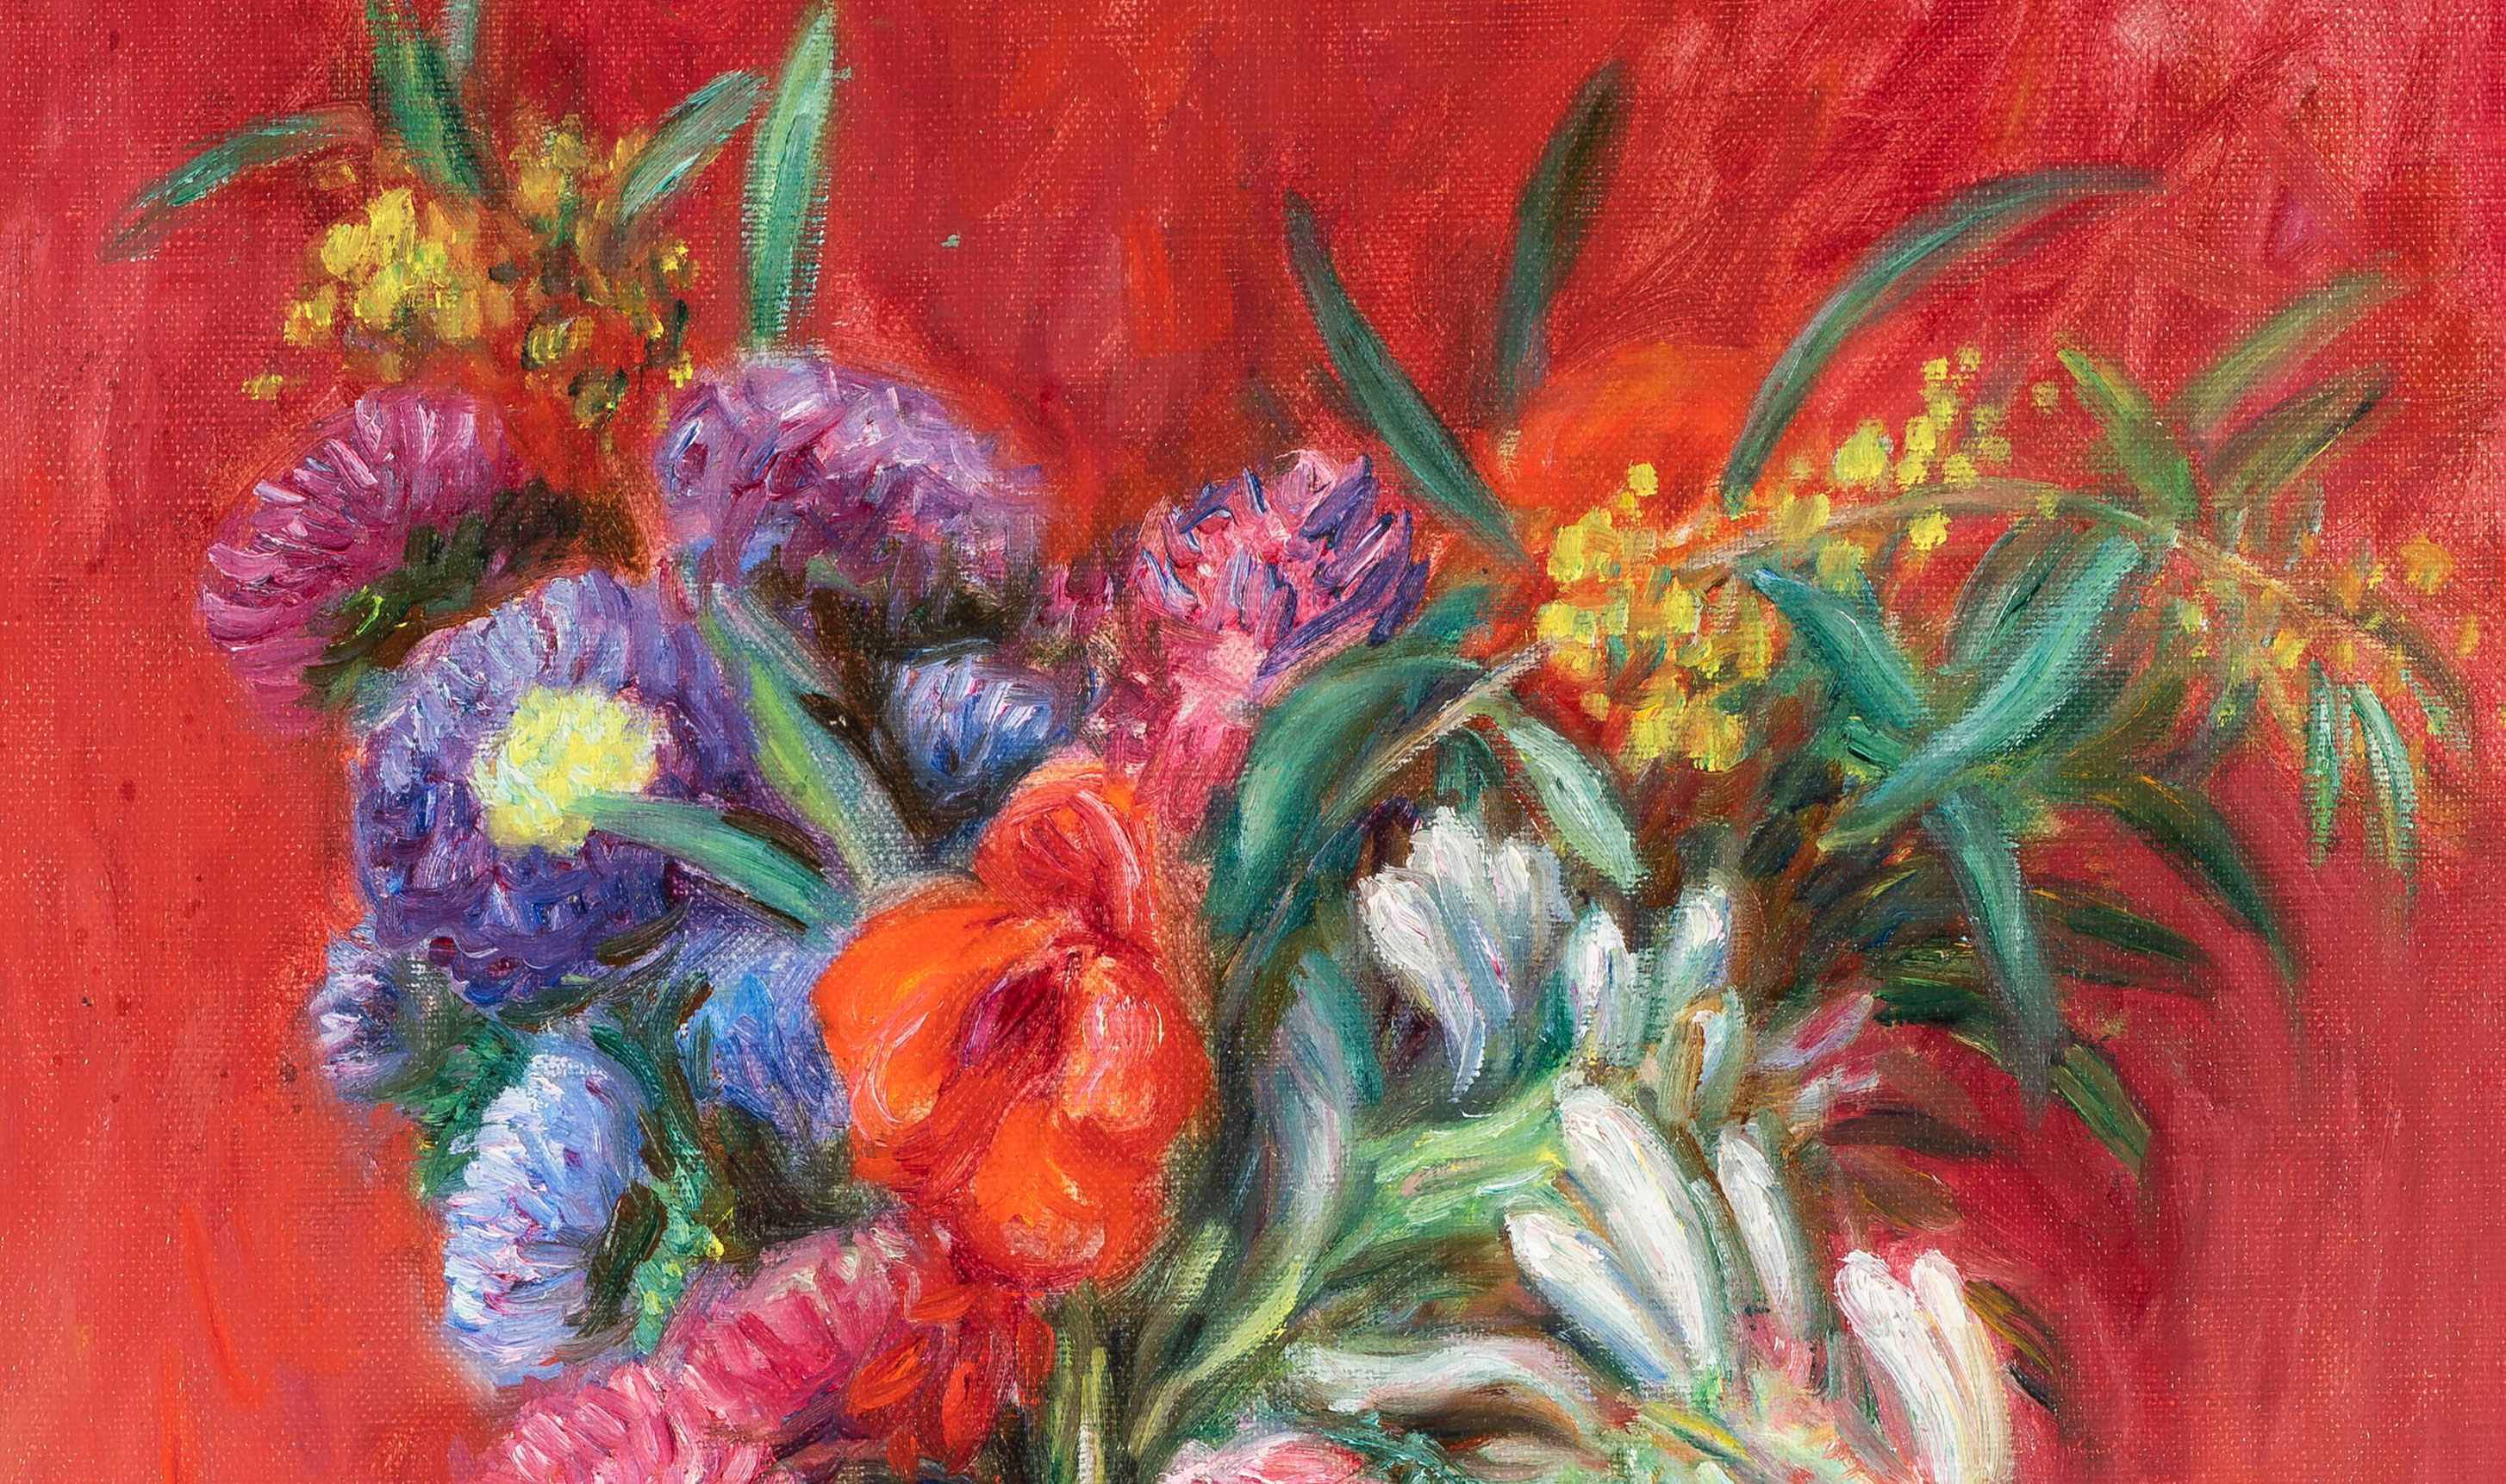 Painting of flowers in a vase that captures light and color.